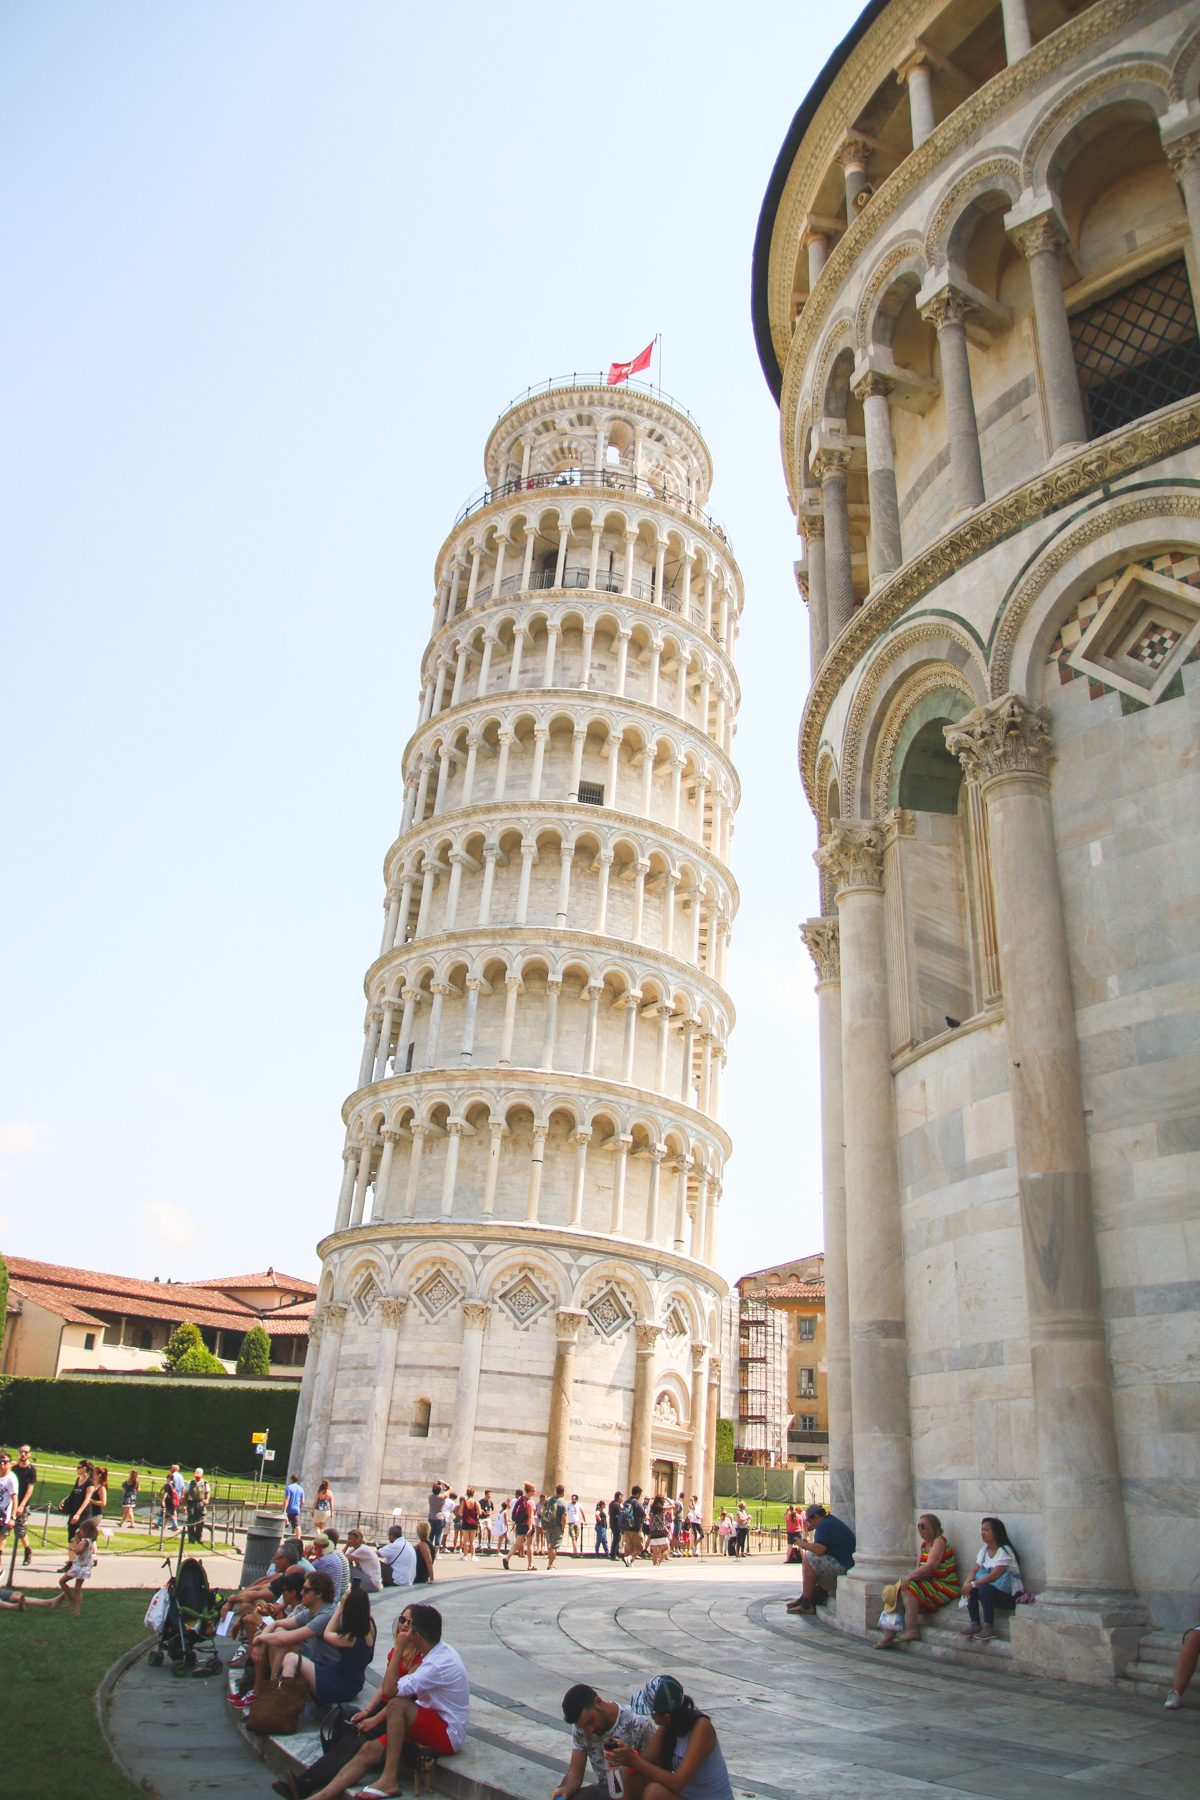 The Leaning Tower of Pisa, Pisa, Italy